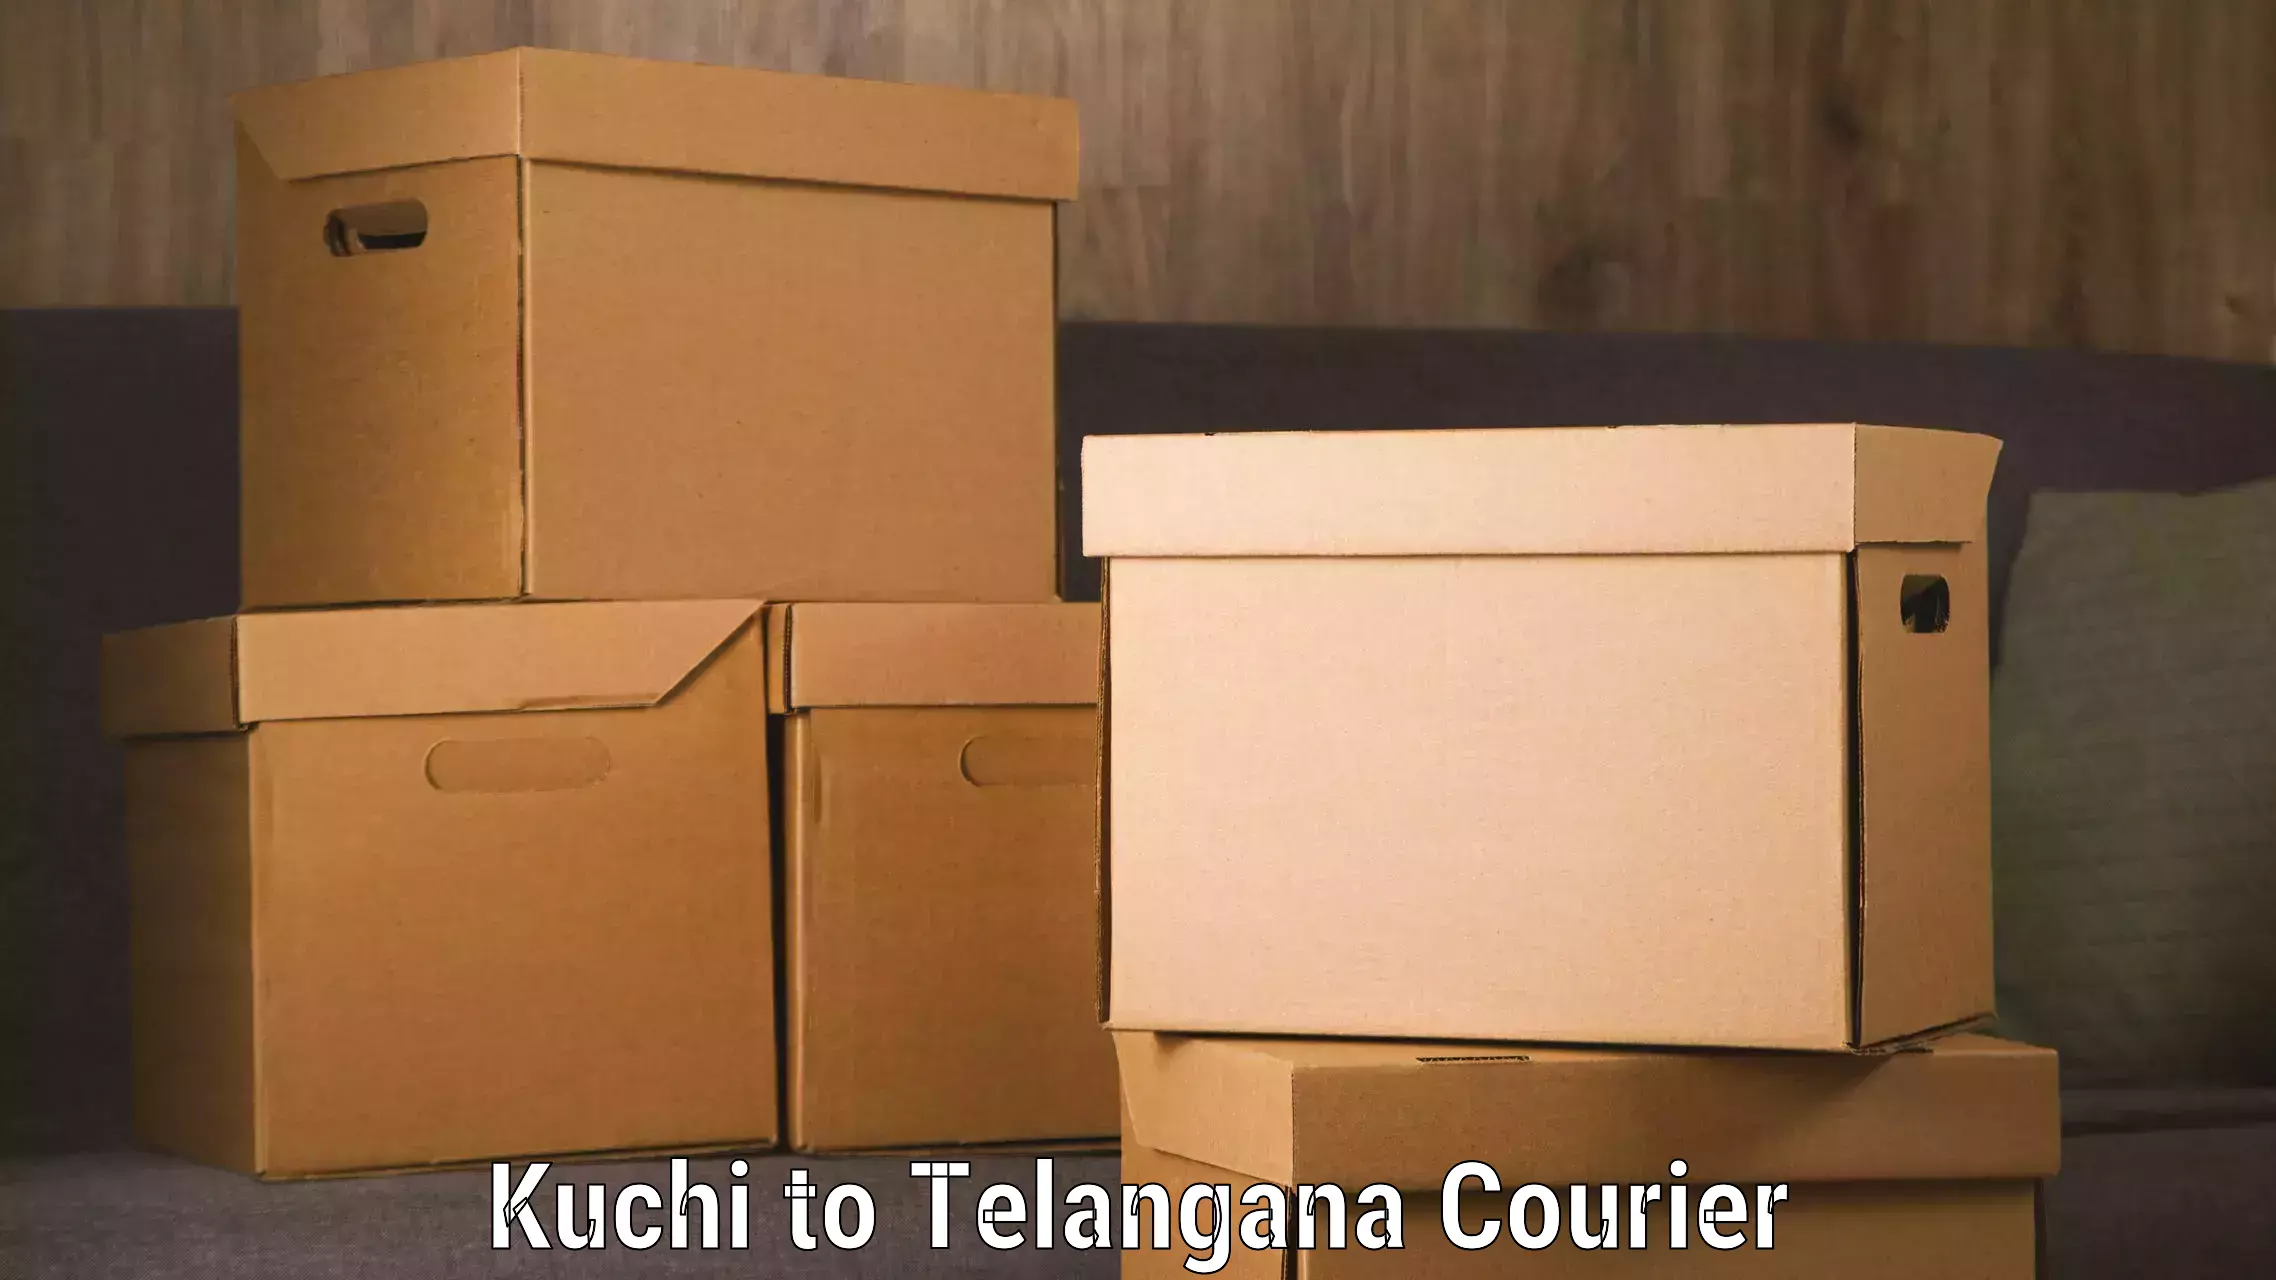 Efficient package consolidation Kuchi to Manneguda